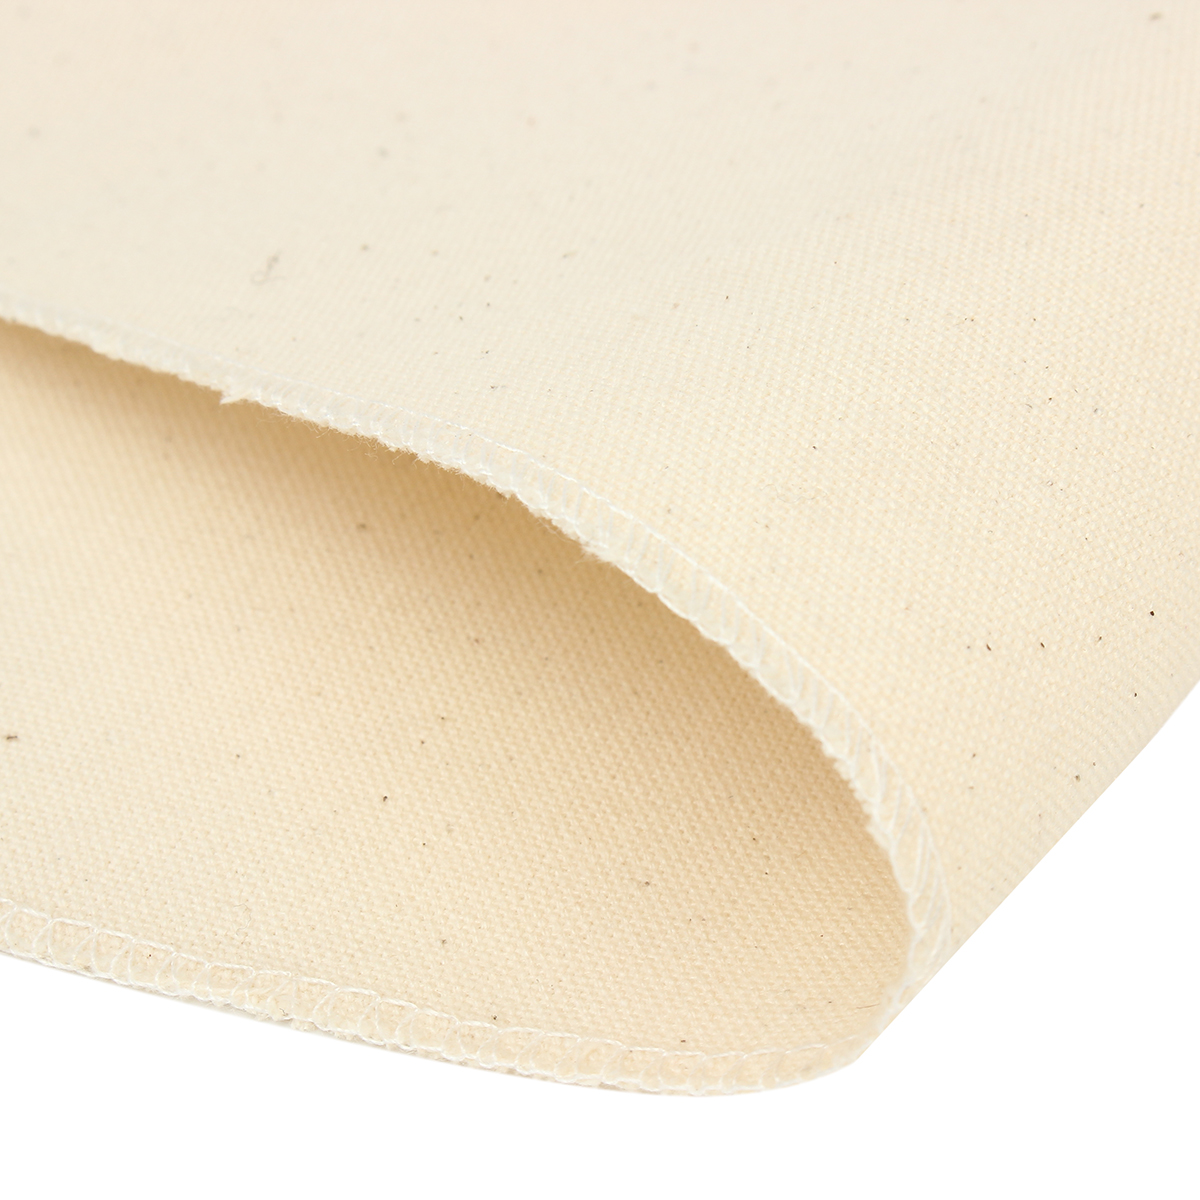 Flax-Liner-Cloth-Fiber-Cloth-Bakers-Proofing-Couche-for-Proving-Bread-Pans-Kitchen-Tool-Fermentation-1141080-7